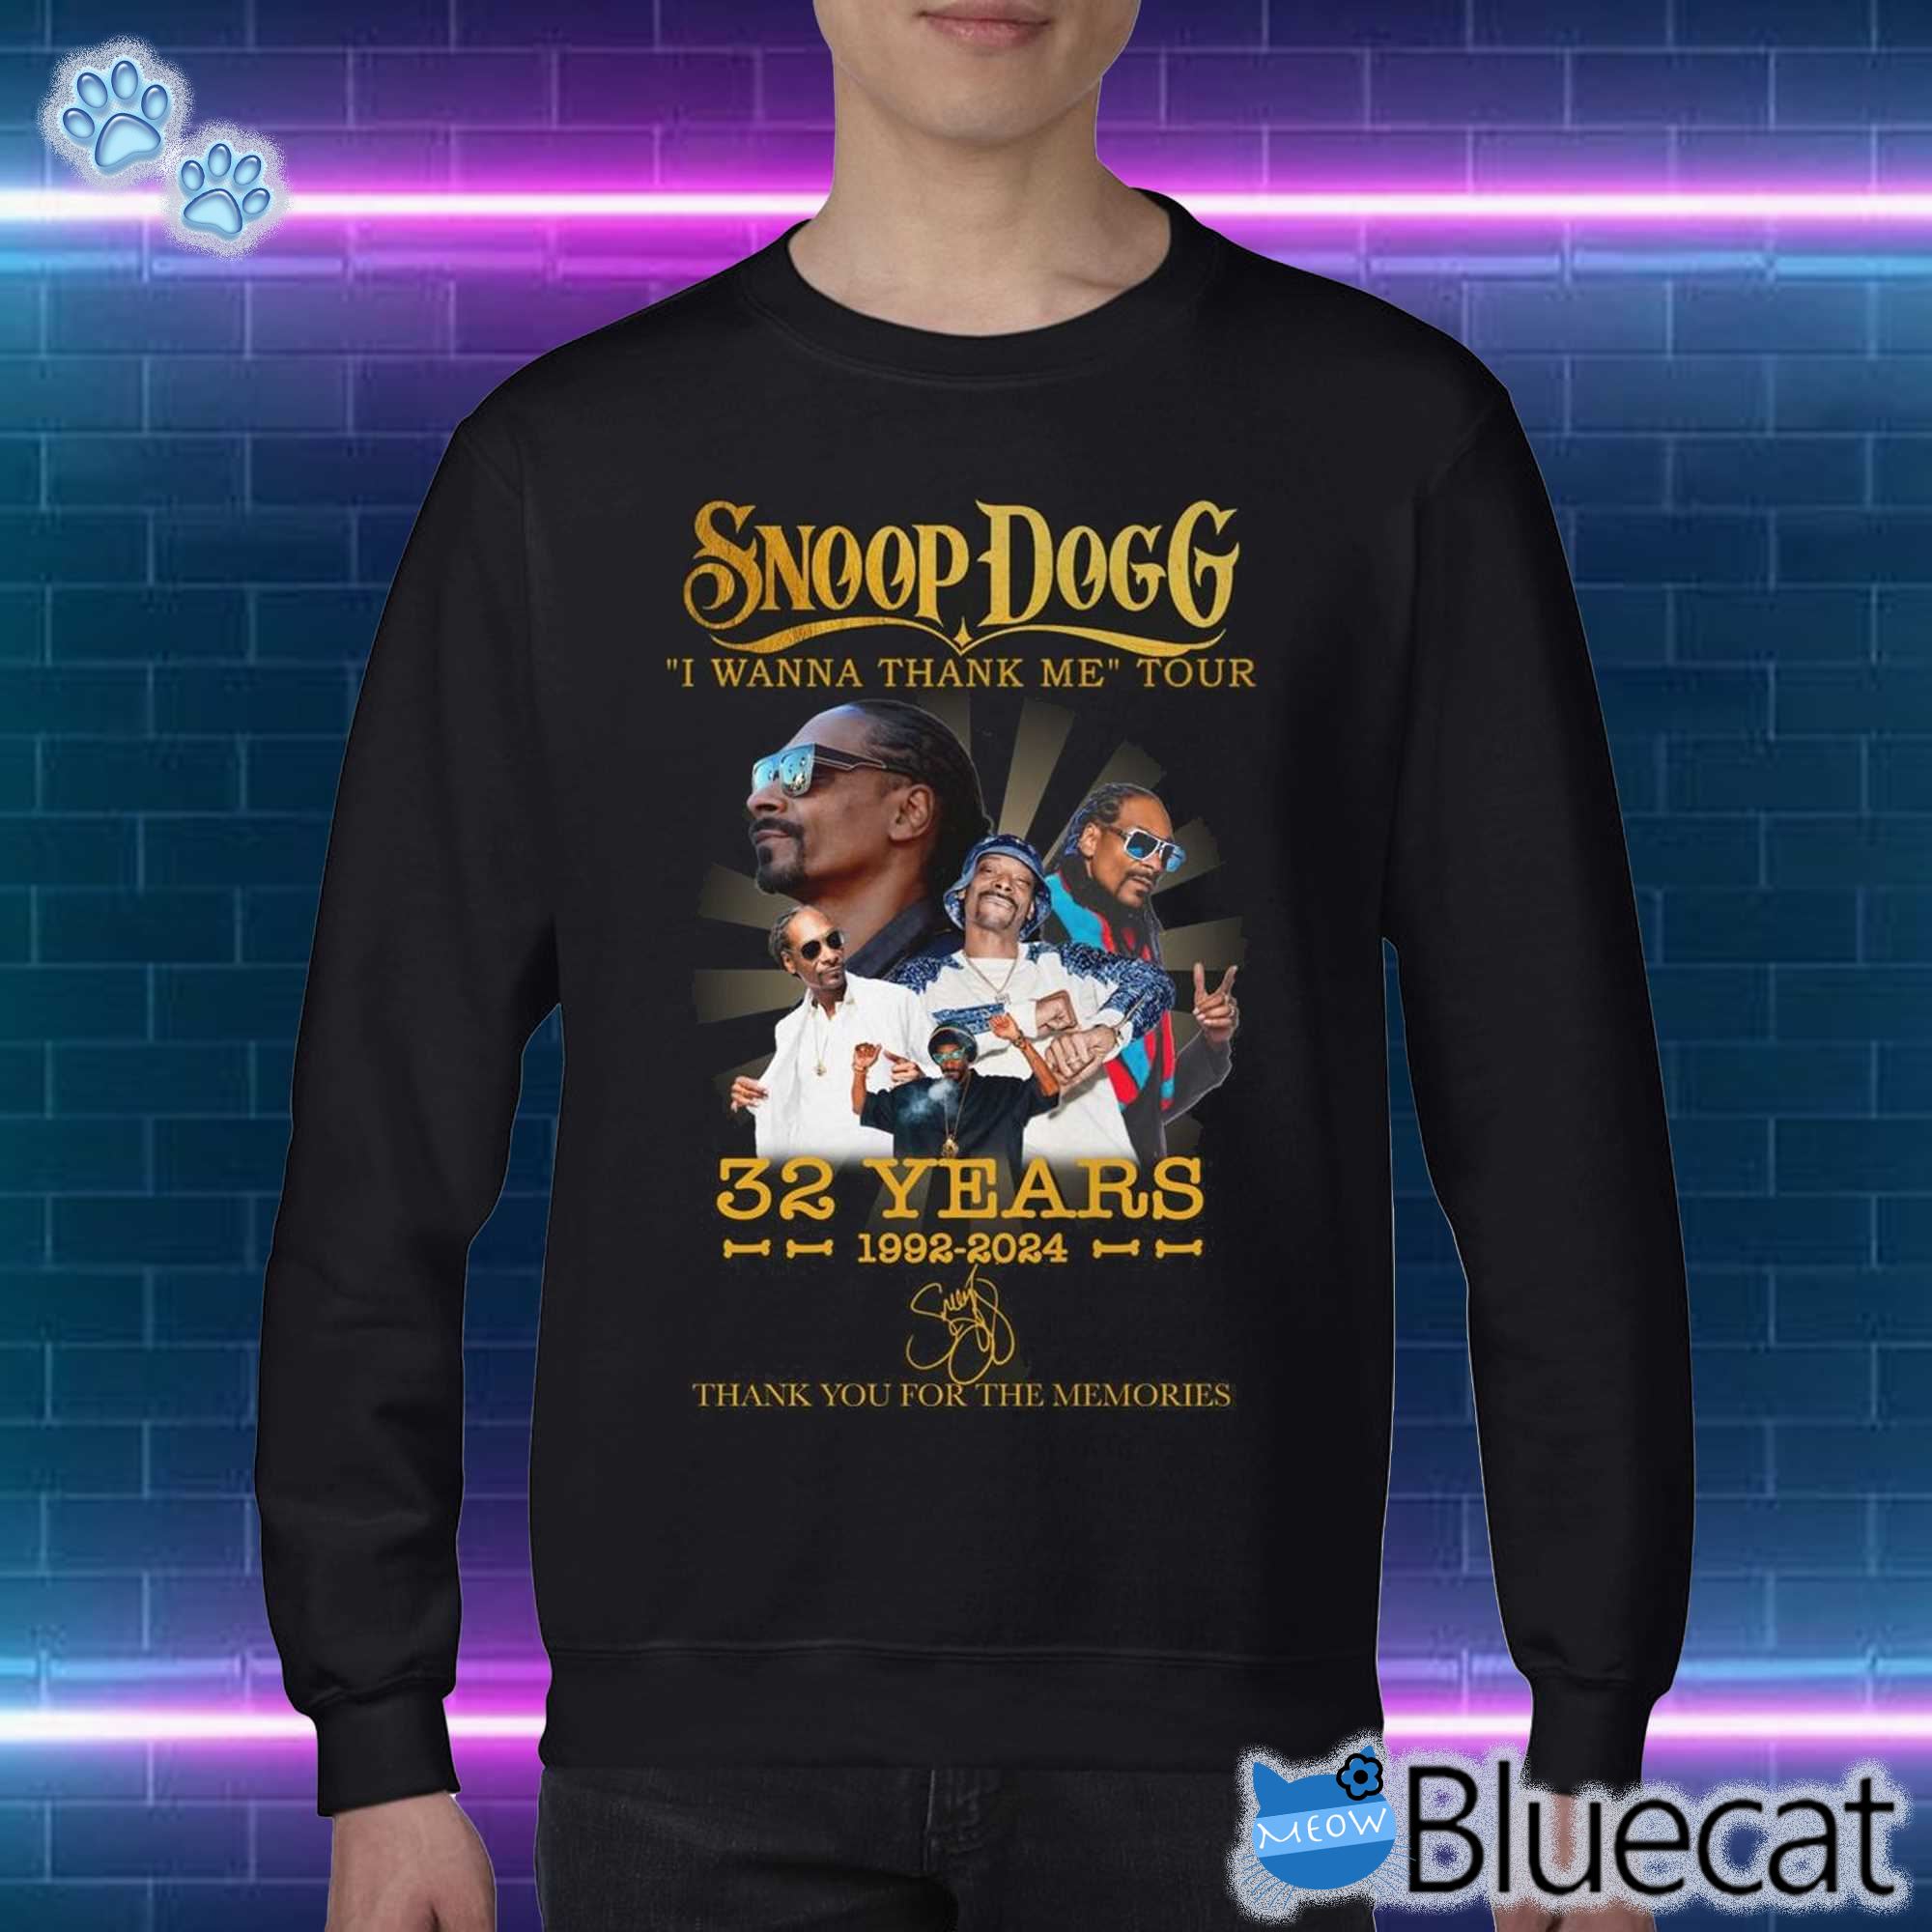 Snoop Dogg I Wanna Thank Me Tour 32 Years 1992 – 2024 Thank You For The Memories T-shirt Sweatshirt 